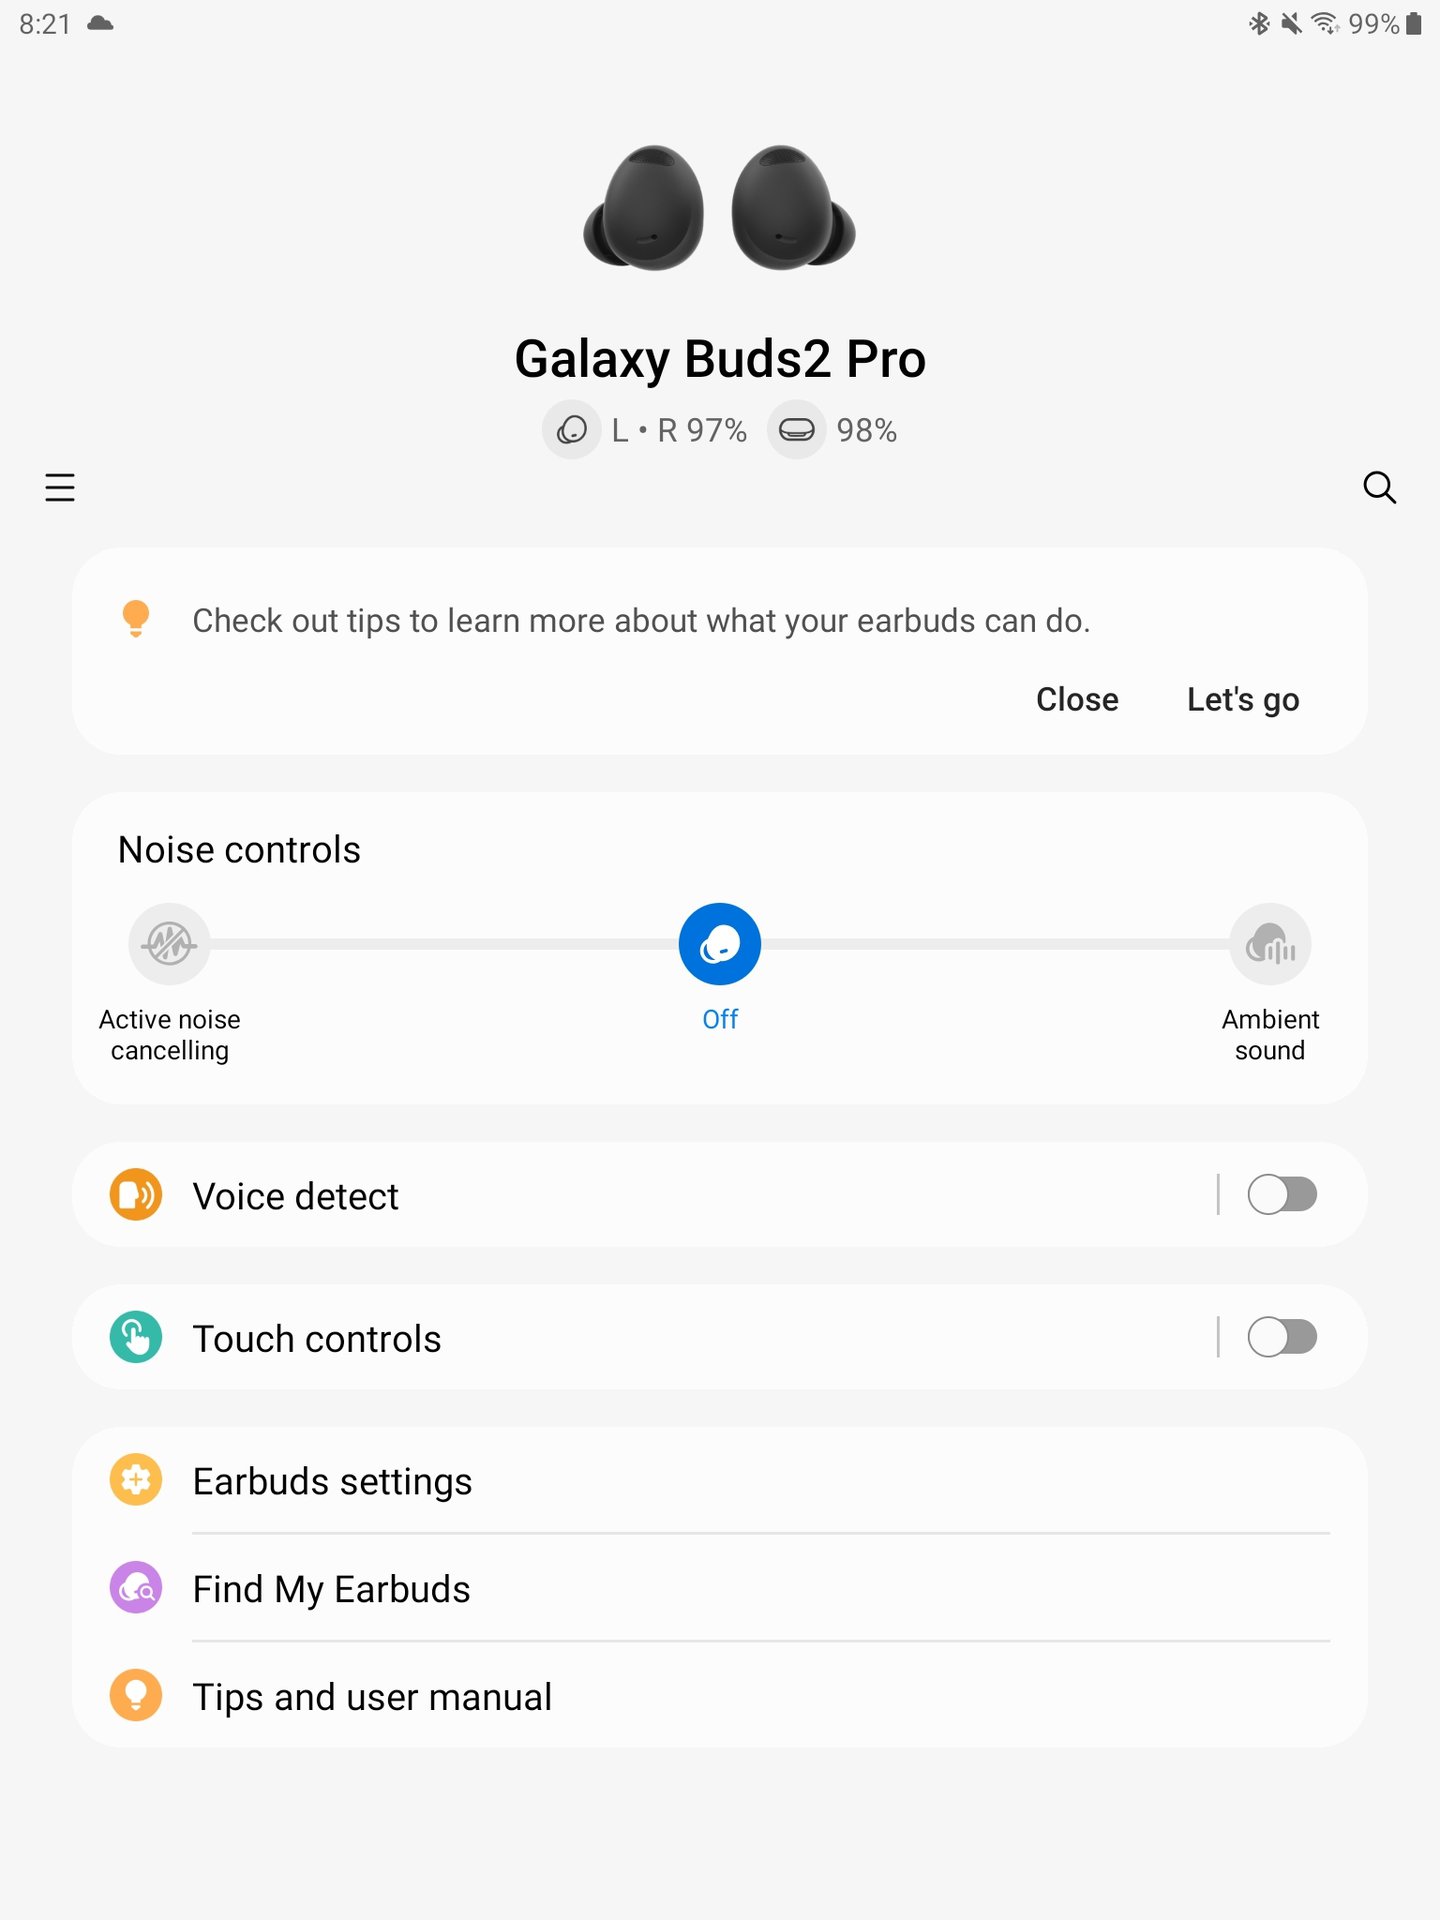 A screenshot of the Samsung Wearable App showing the Galaxy Buds 2 Pro connected showing the home page with the main options to control the buds and the current ANC mode.